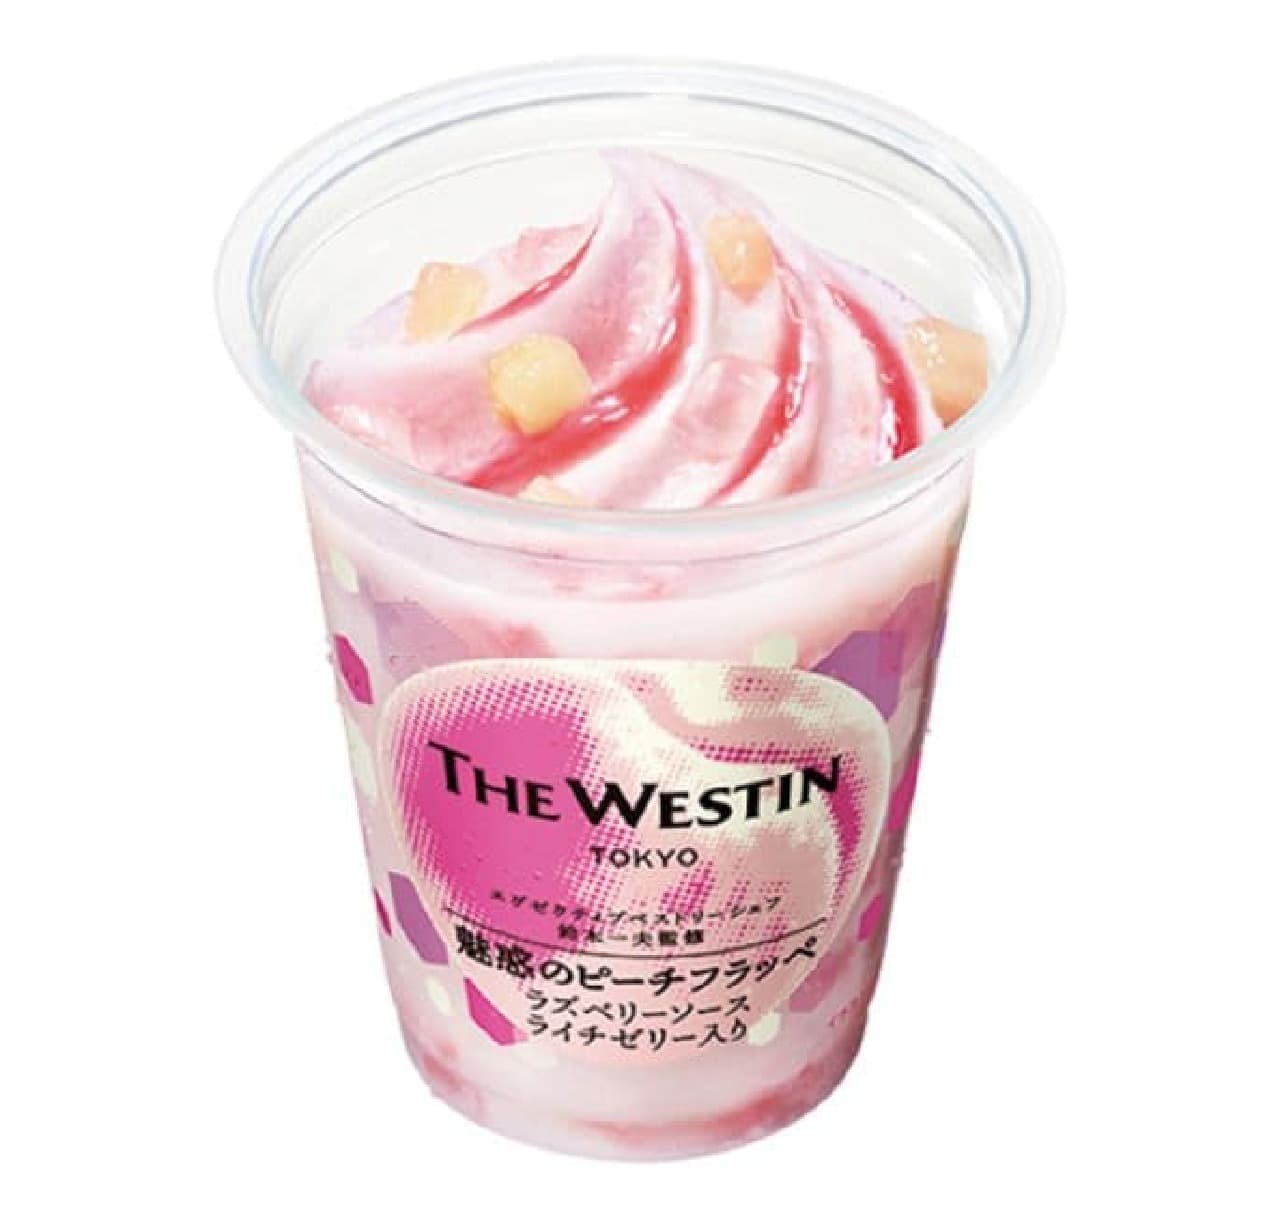 FamilyMart "Enchanting Peach Frappe supervised by The Westin Tokyo